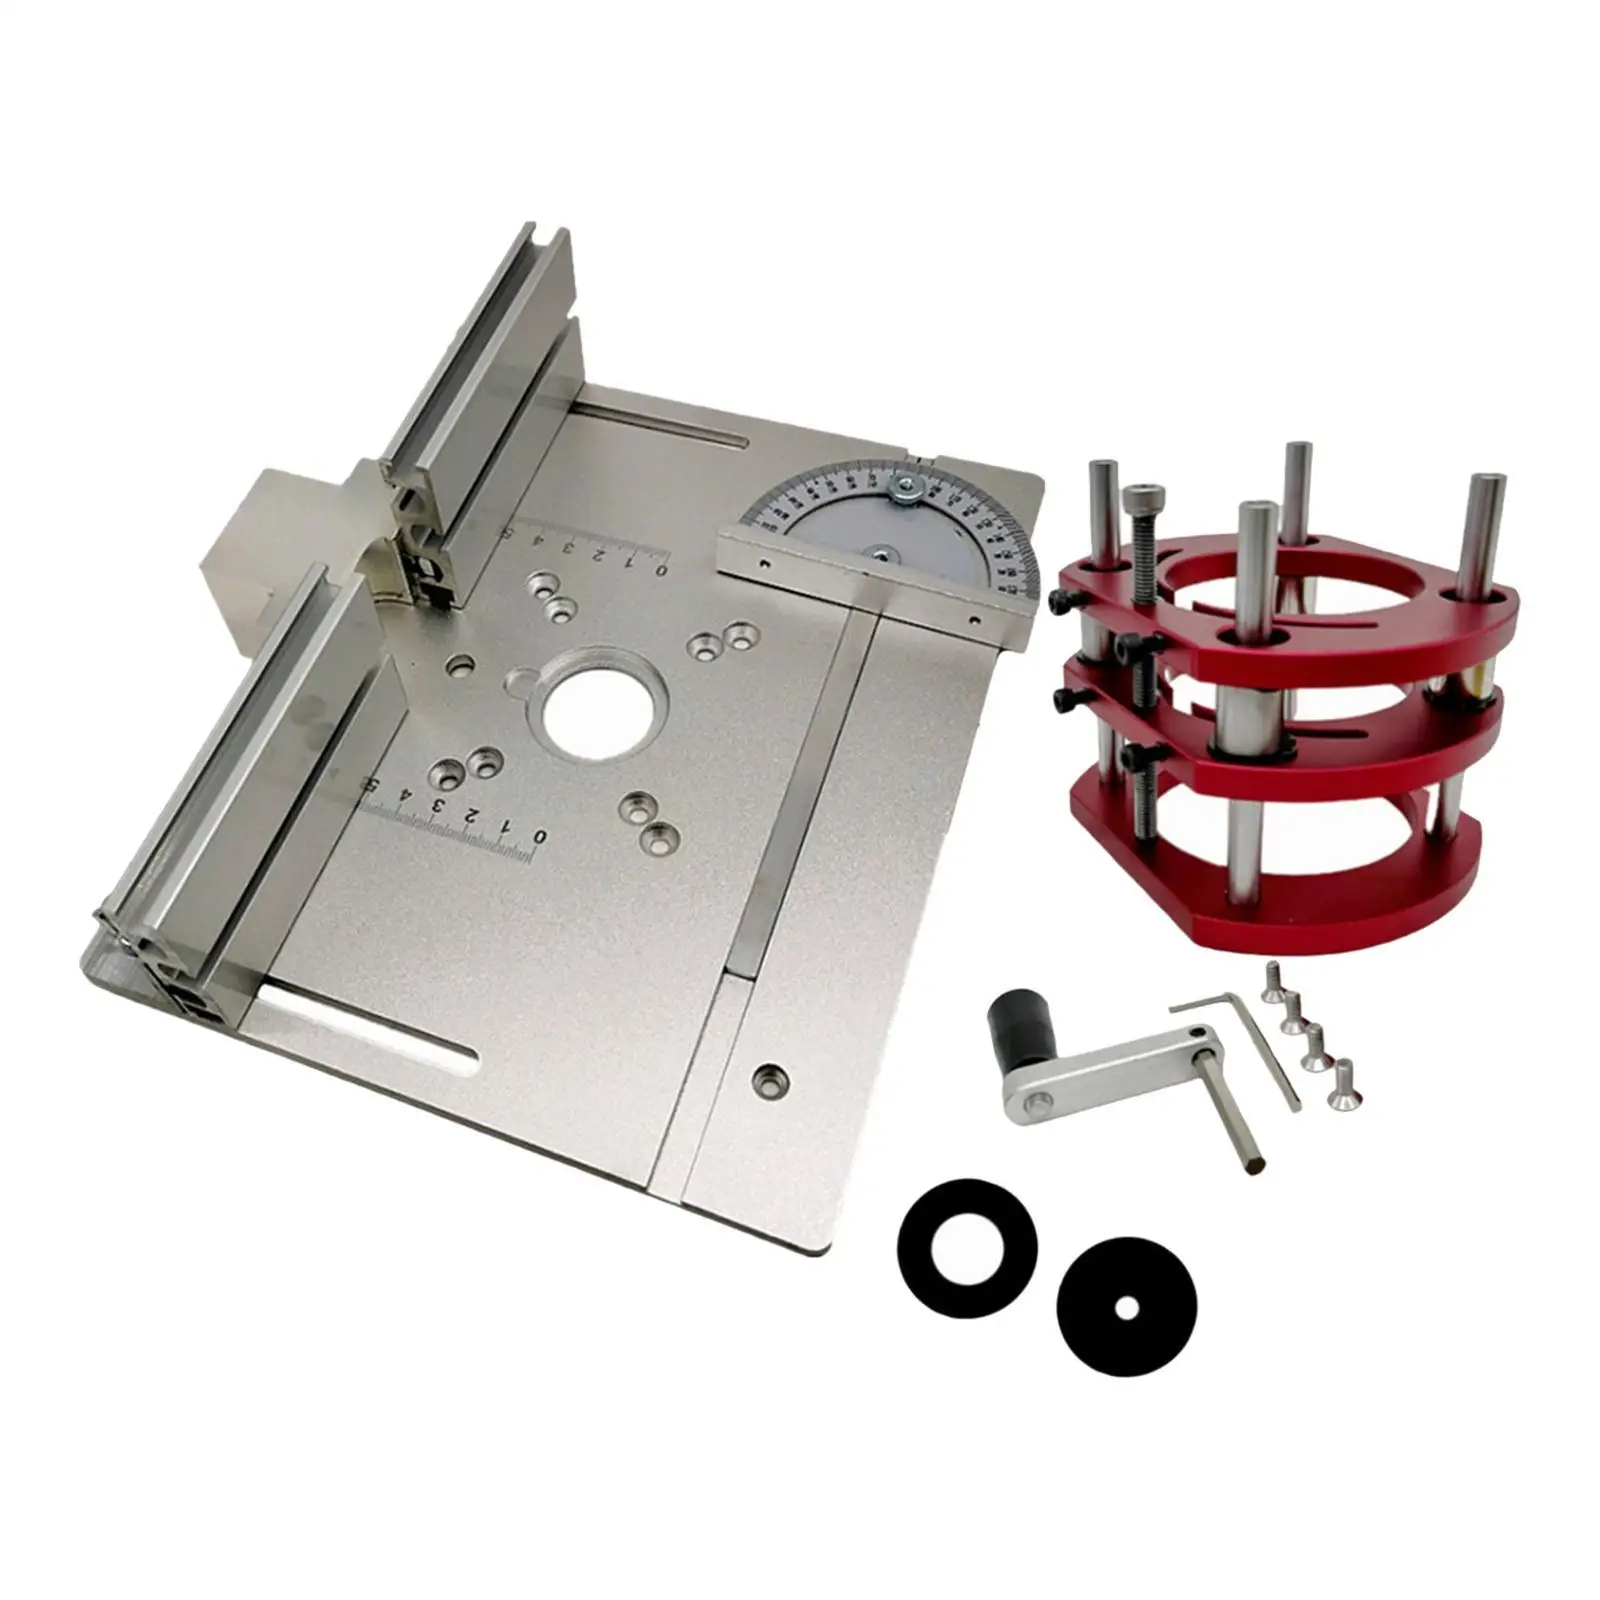 

Router lifting system Engraving Machine for 64-66mm Diameter Motors Mounting